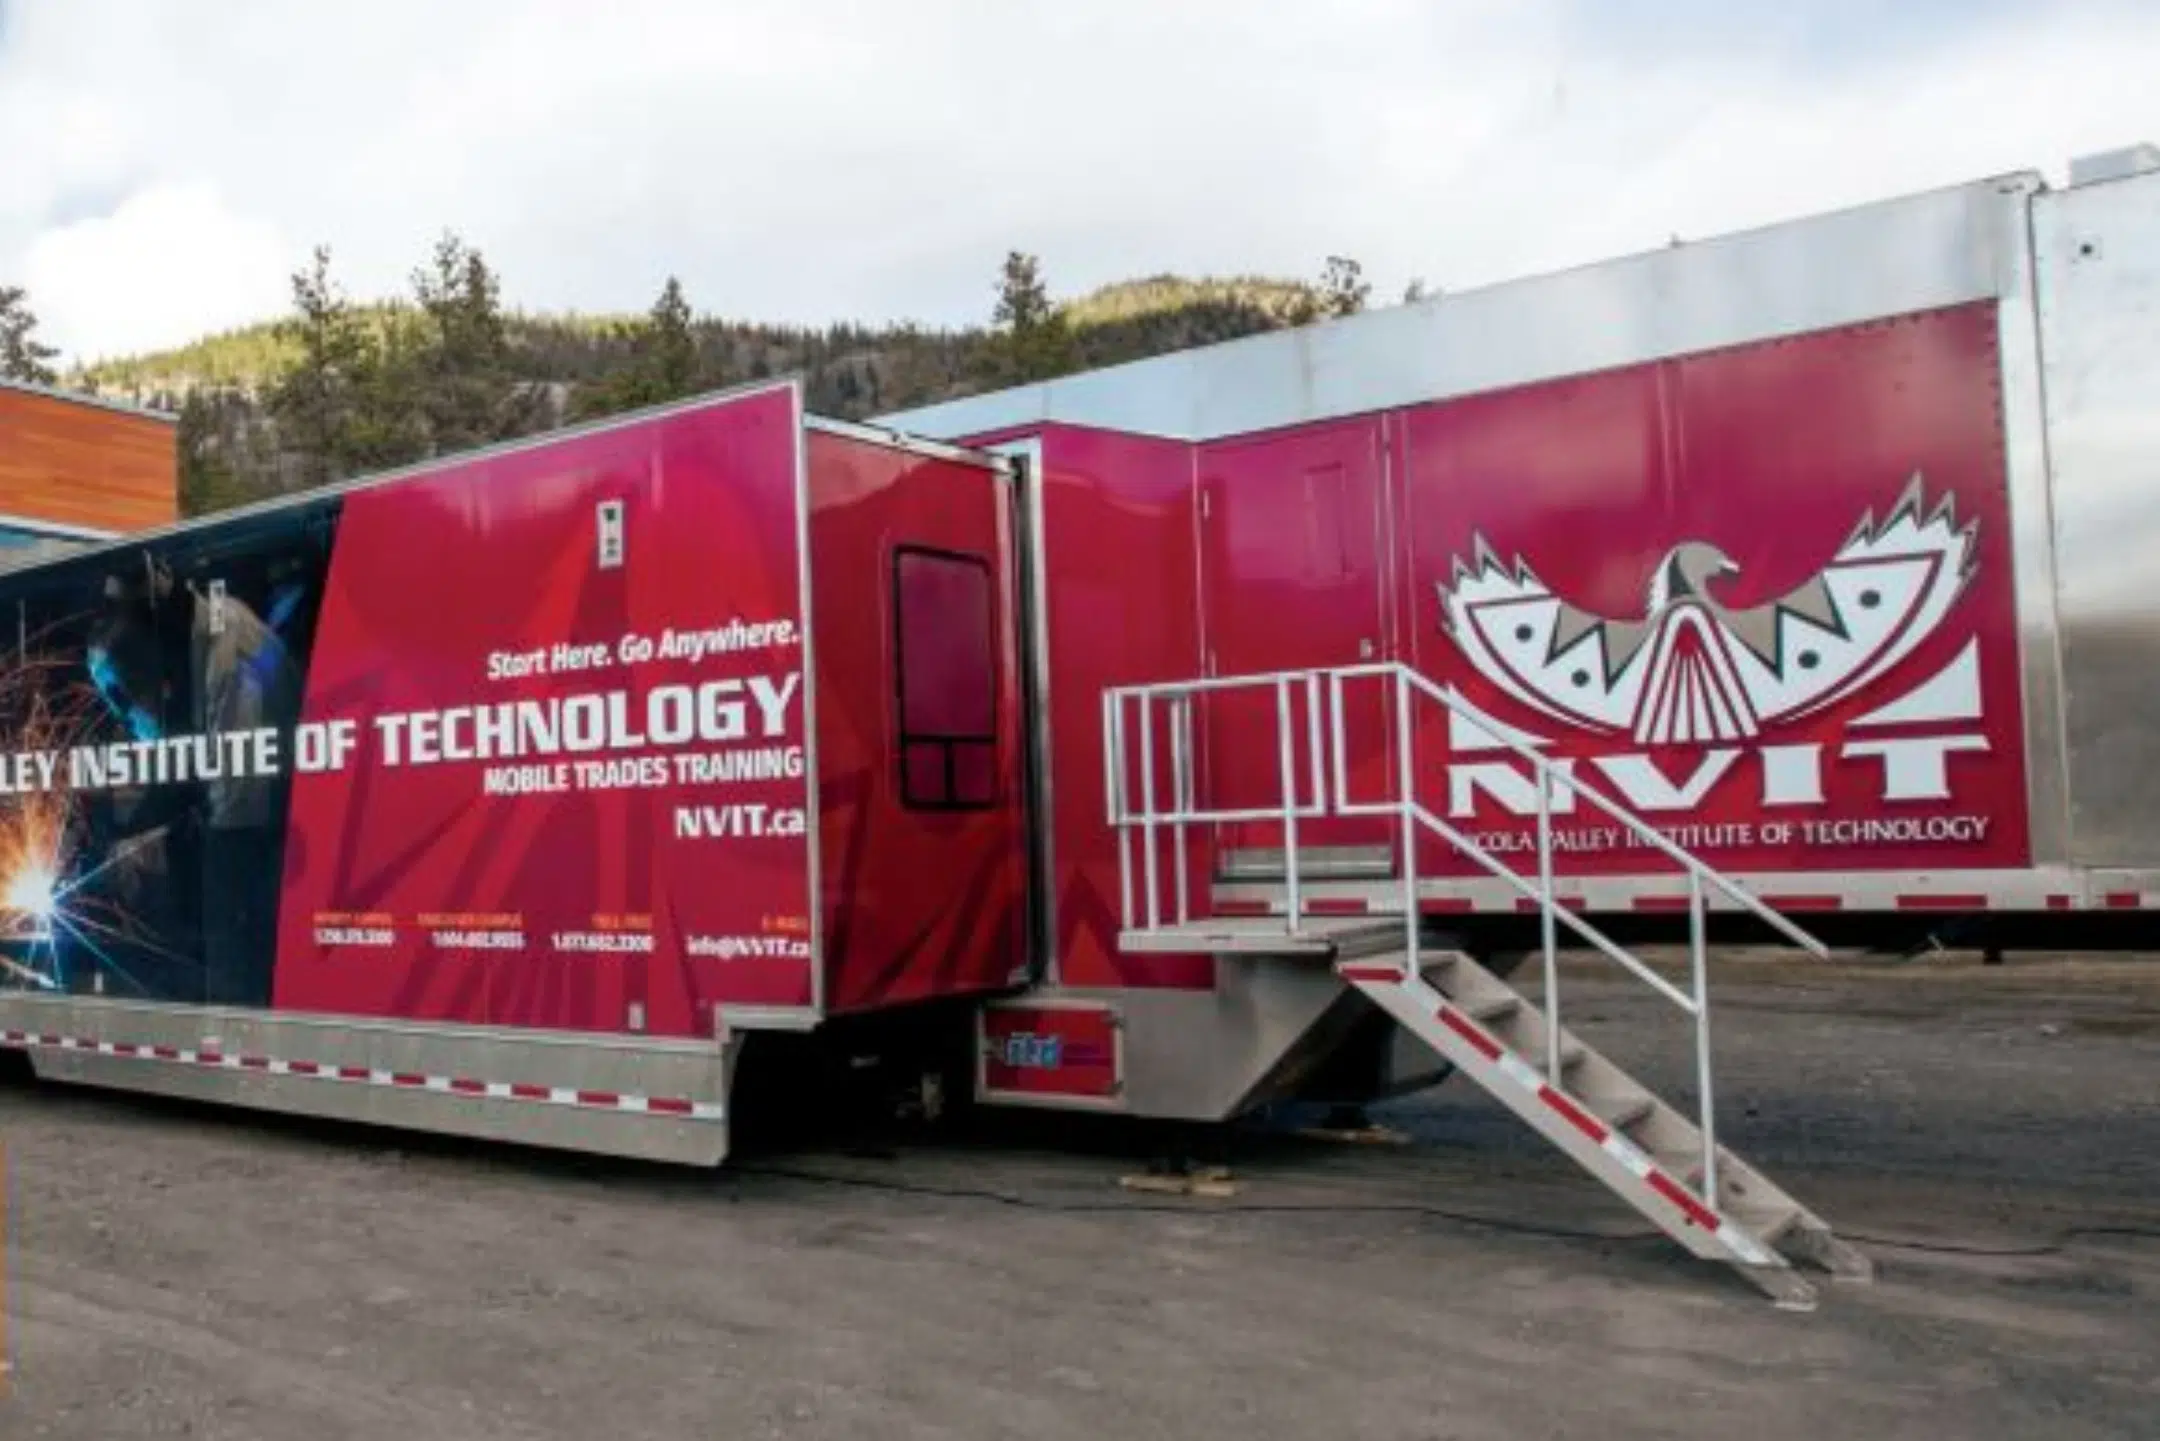 B.C. rural Indigenous students to benefit from three new mobile training units